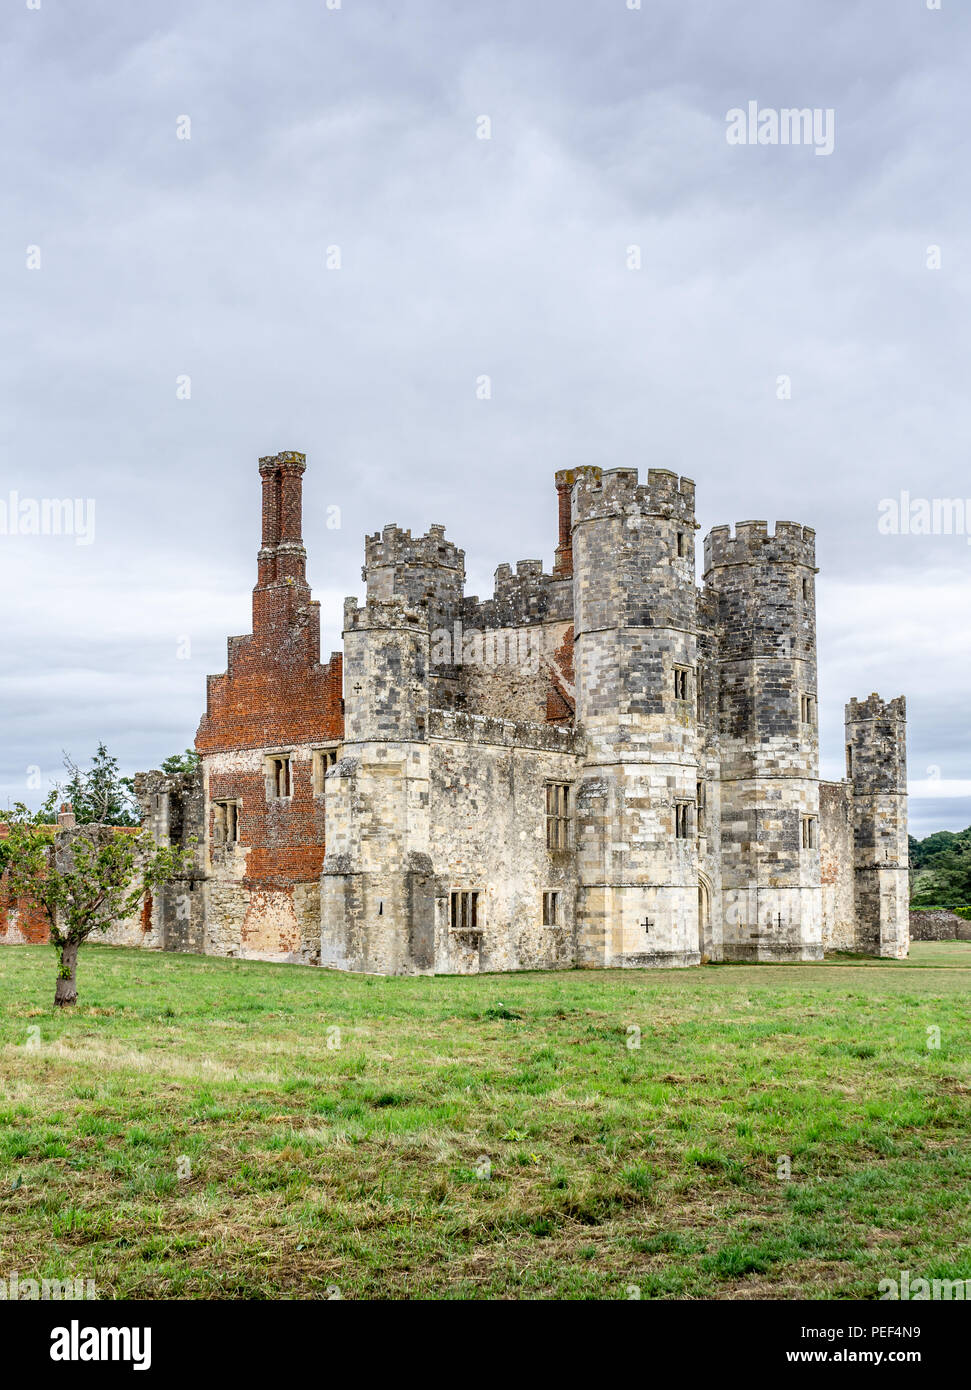 The remains of the medieval Titchfield Abbey surrounded by the Hampshire countryside, English Heritage site, Titchfield, Hampshire, England, UK Stock Photo